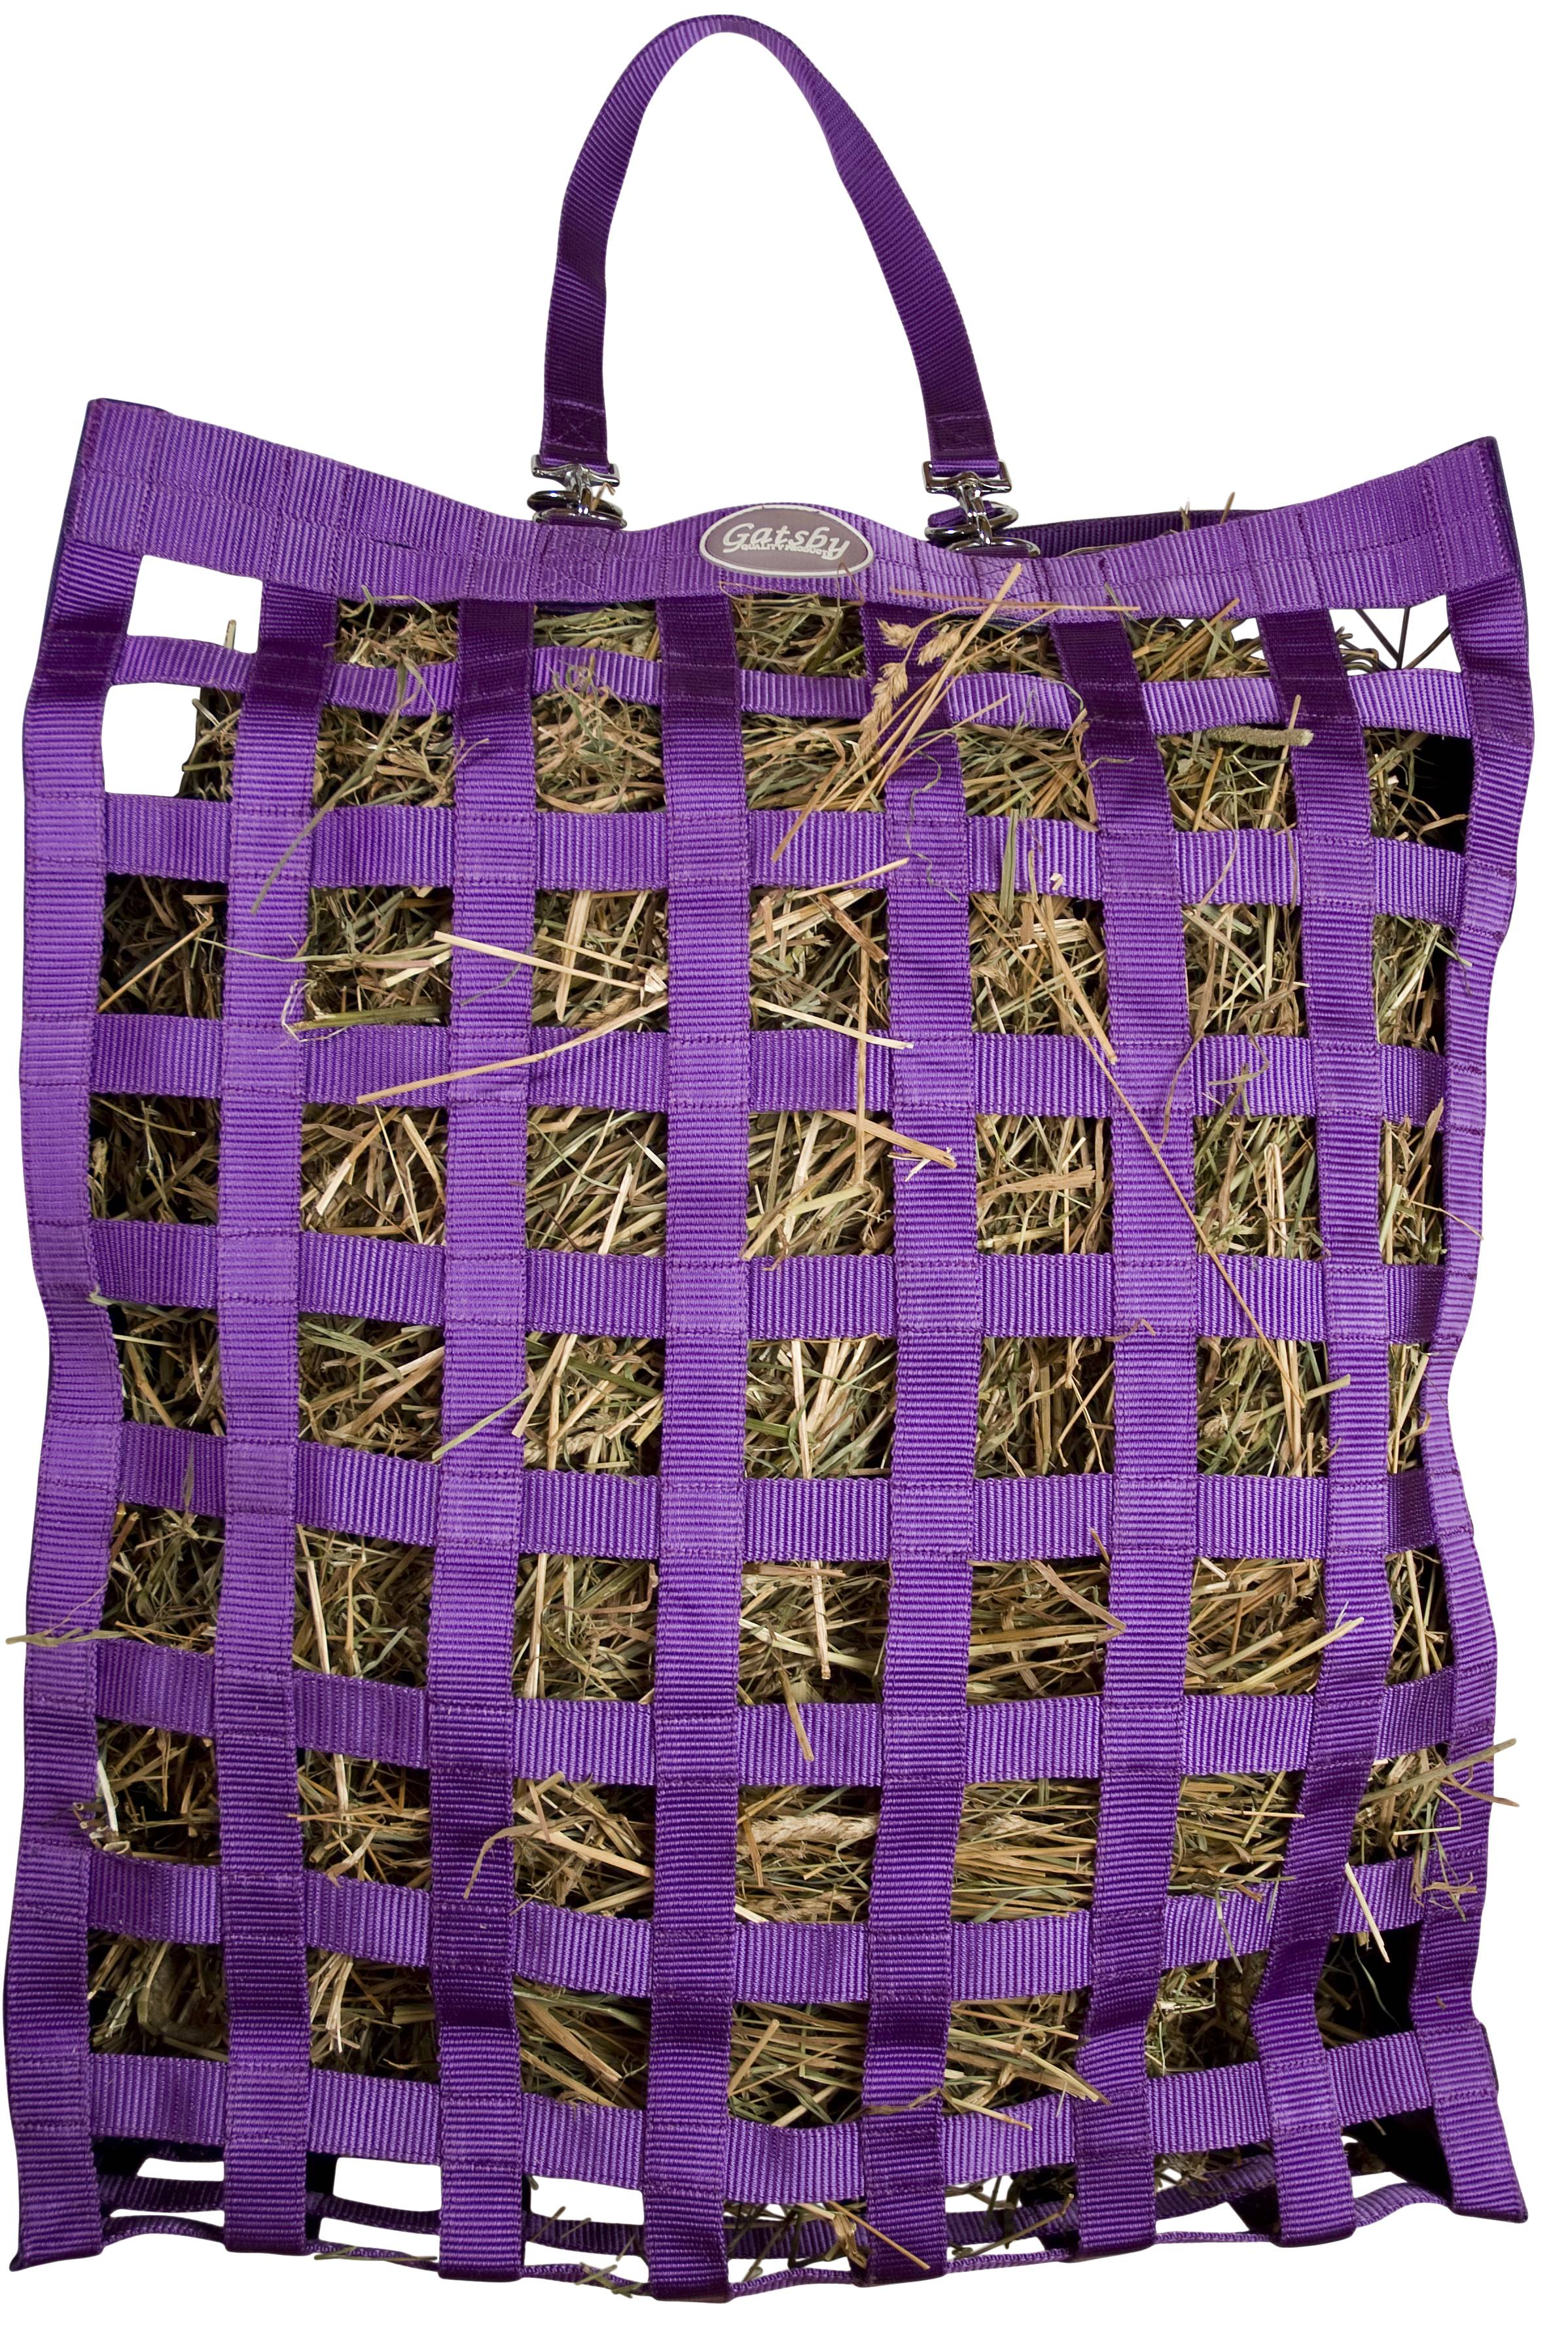 Gatsby 100% All Natural Slow Hay Feeder | EquestrianCollections